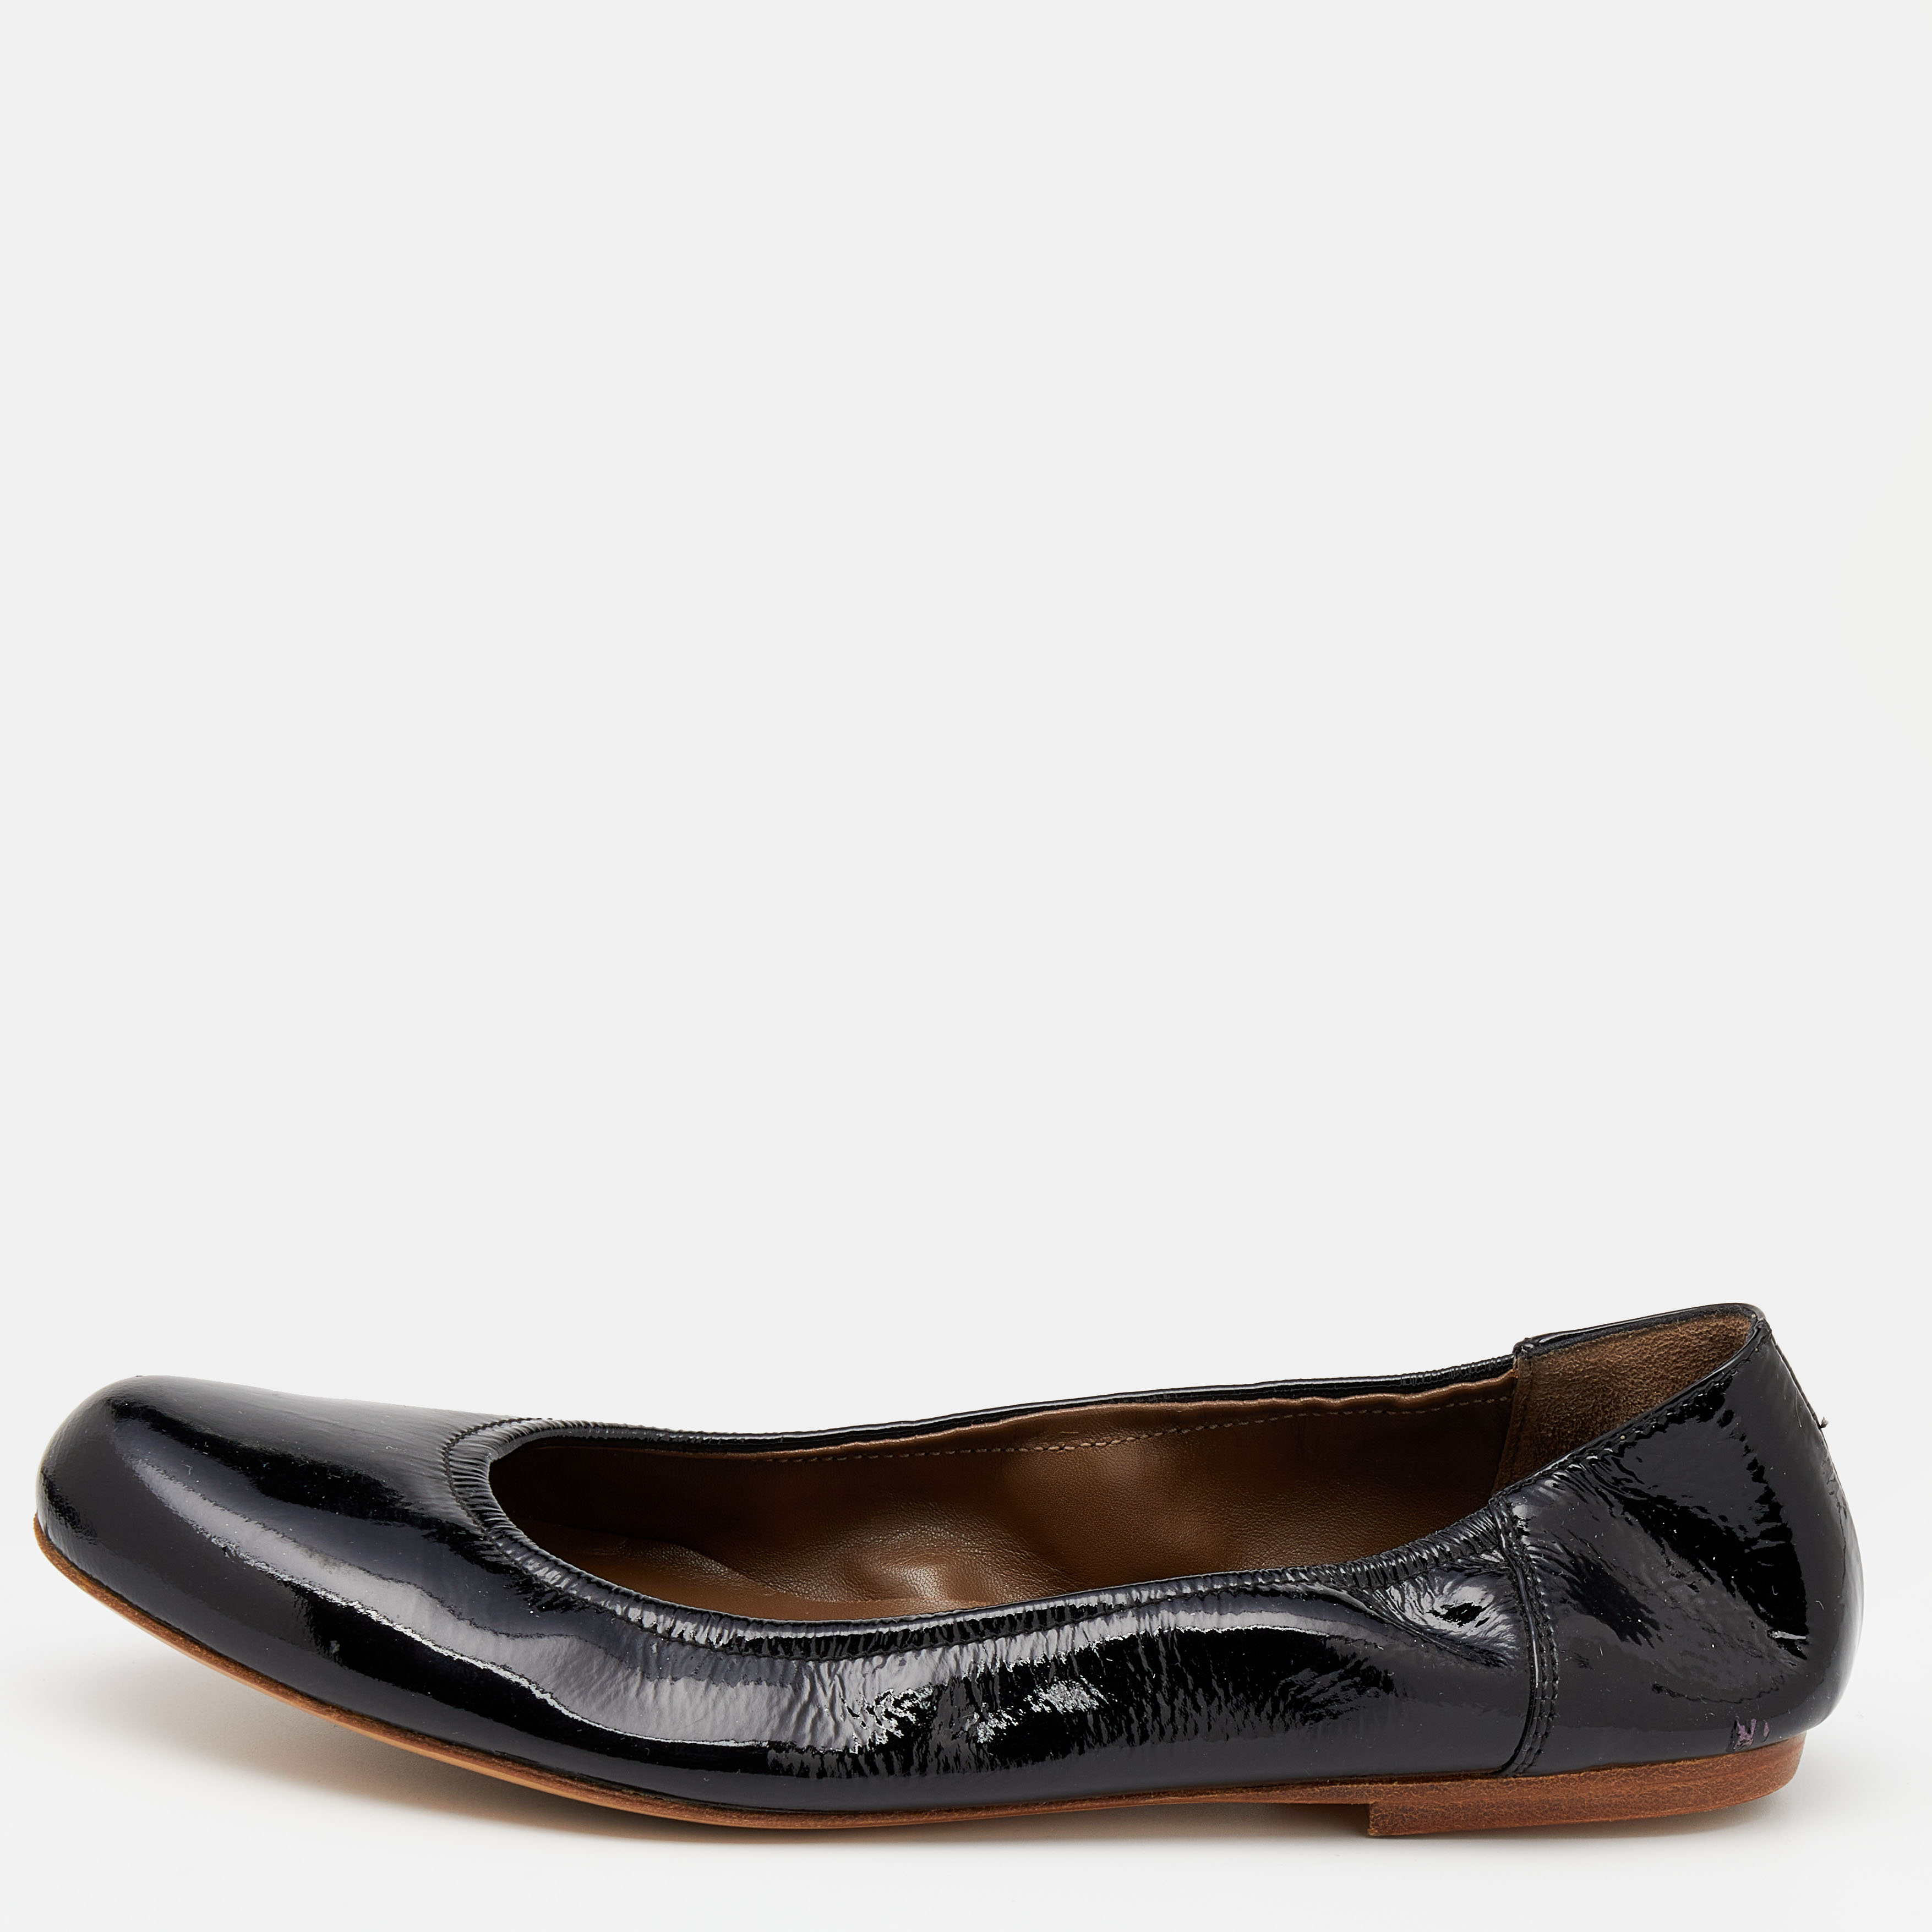 Pre-owned Marni Black Patent Leather Scrunch Ballet Flats Size 36